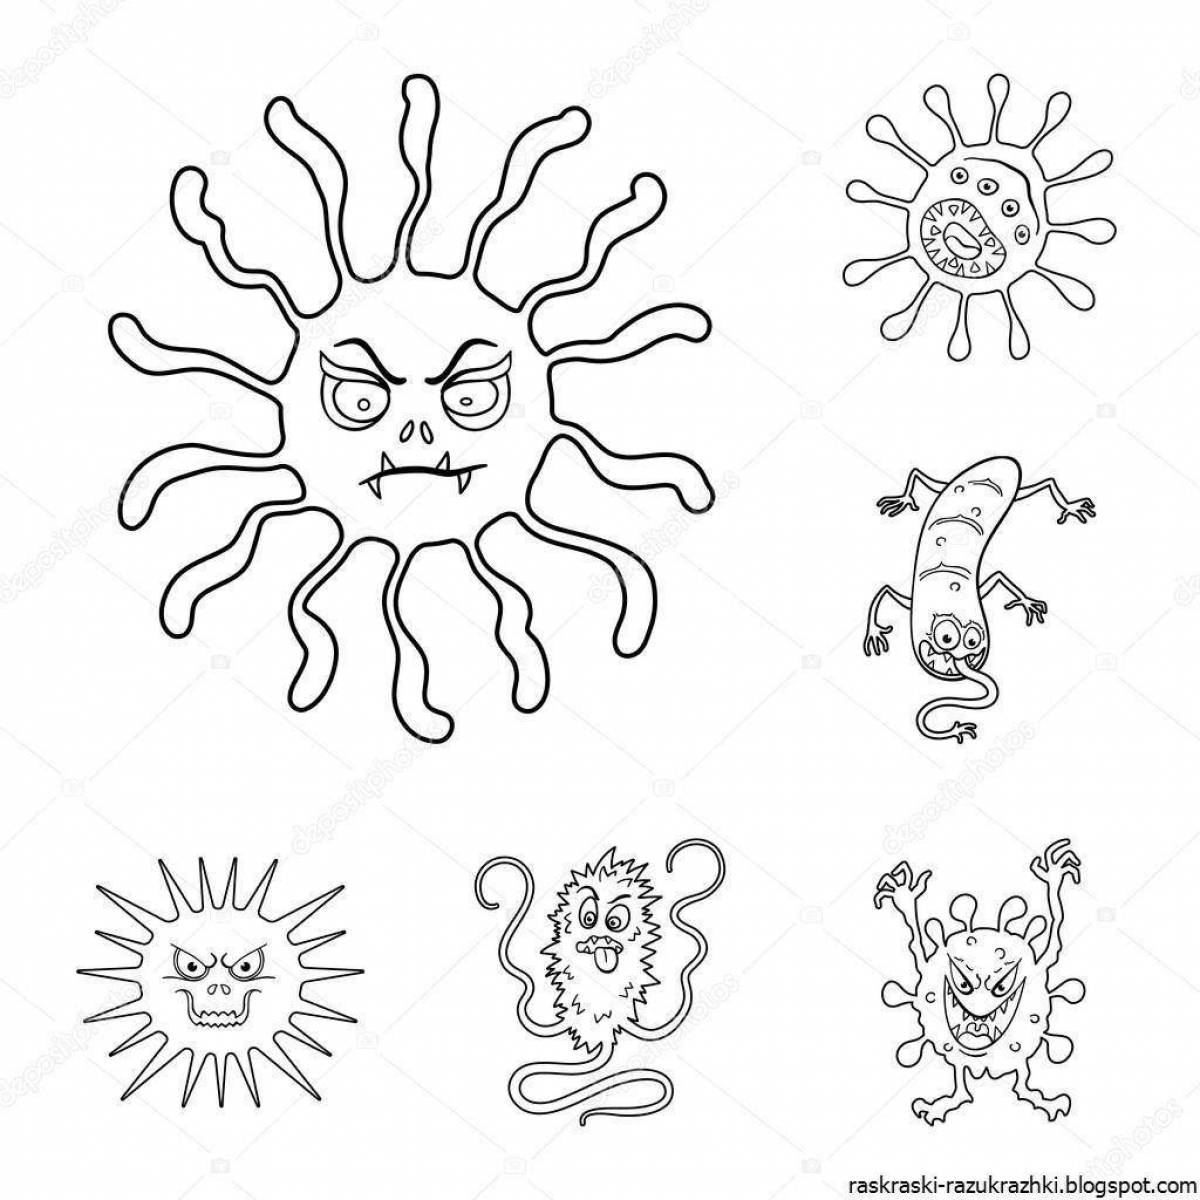 Viruses and microbes creative coloring